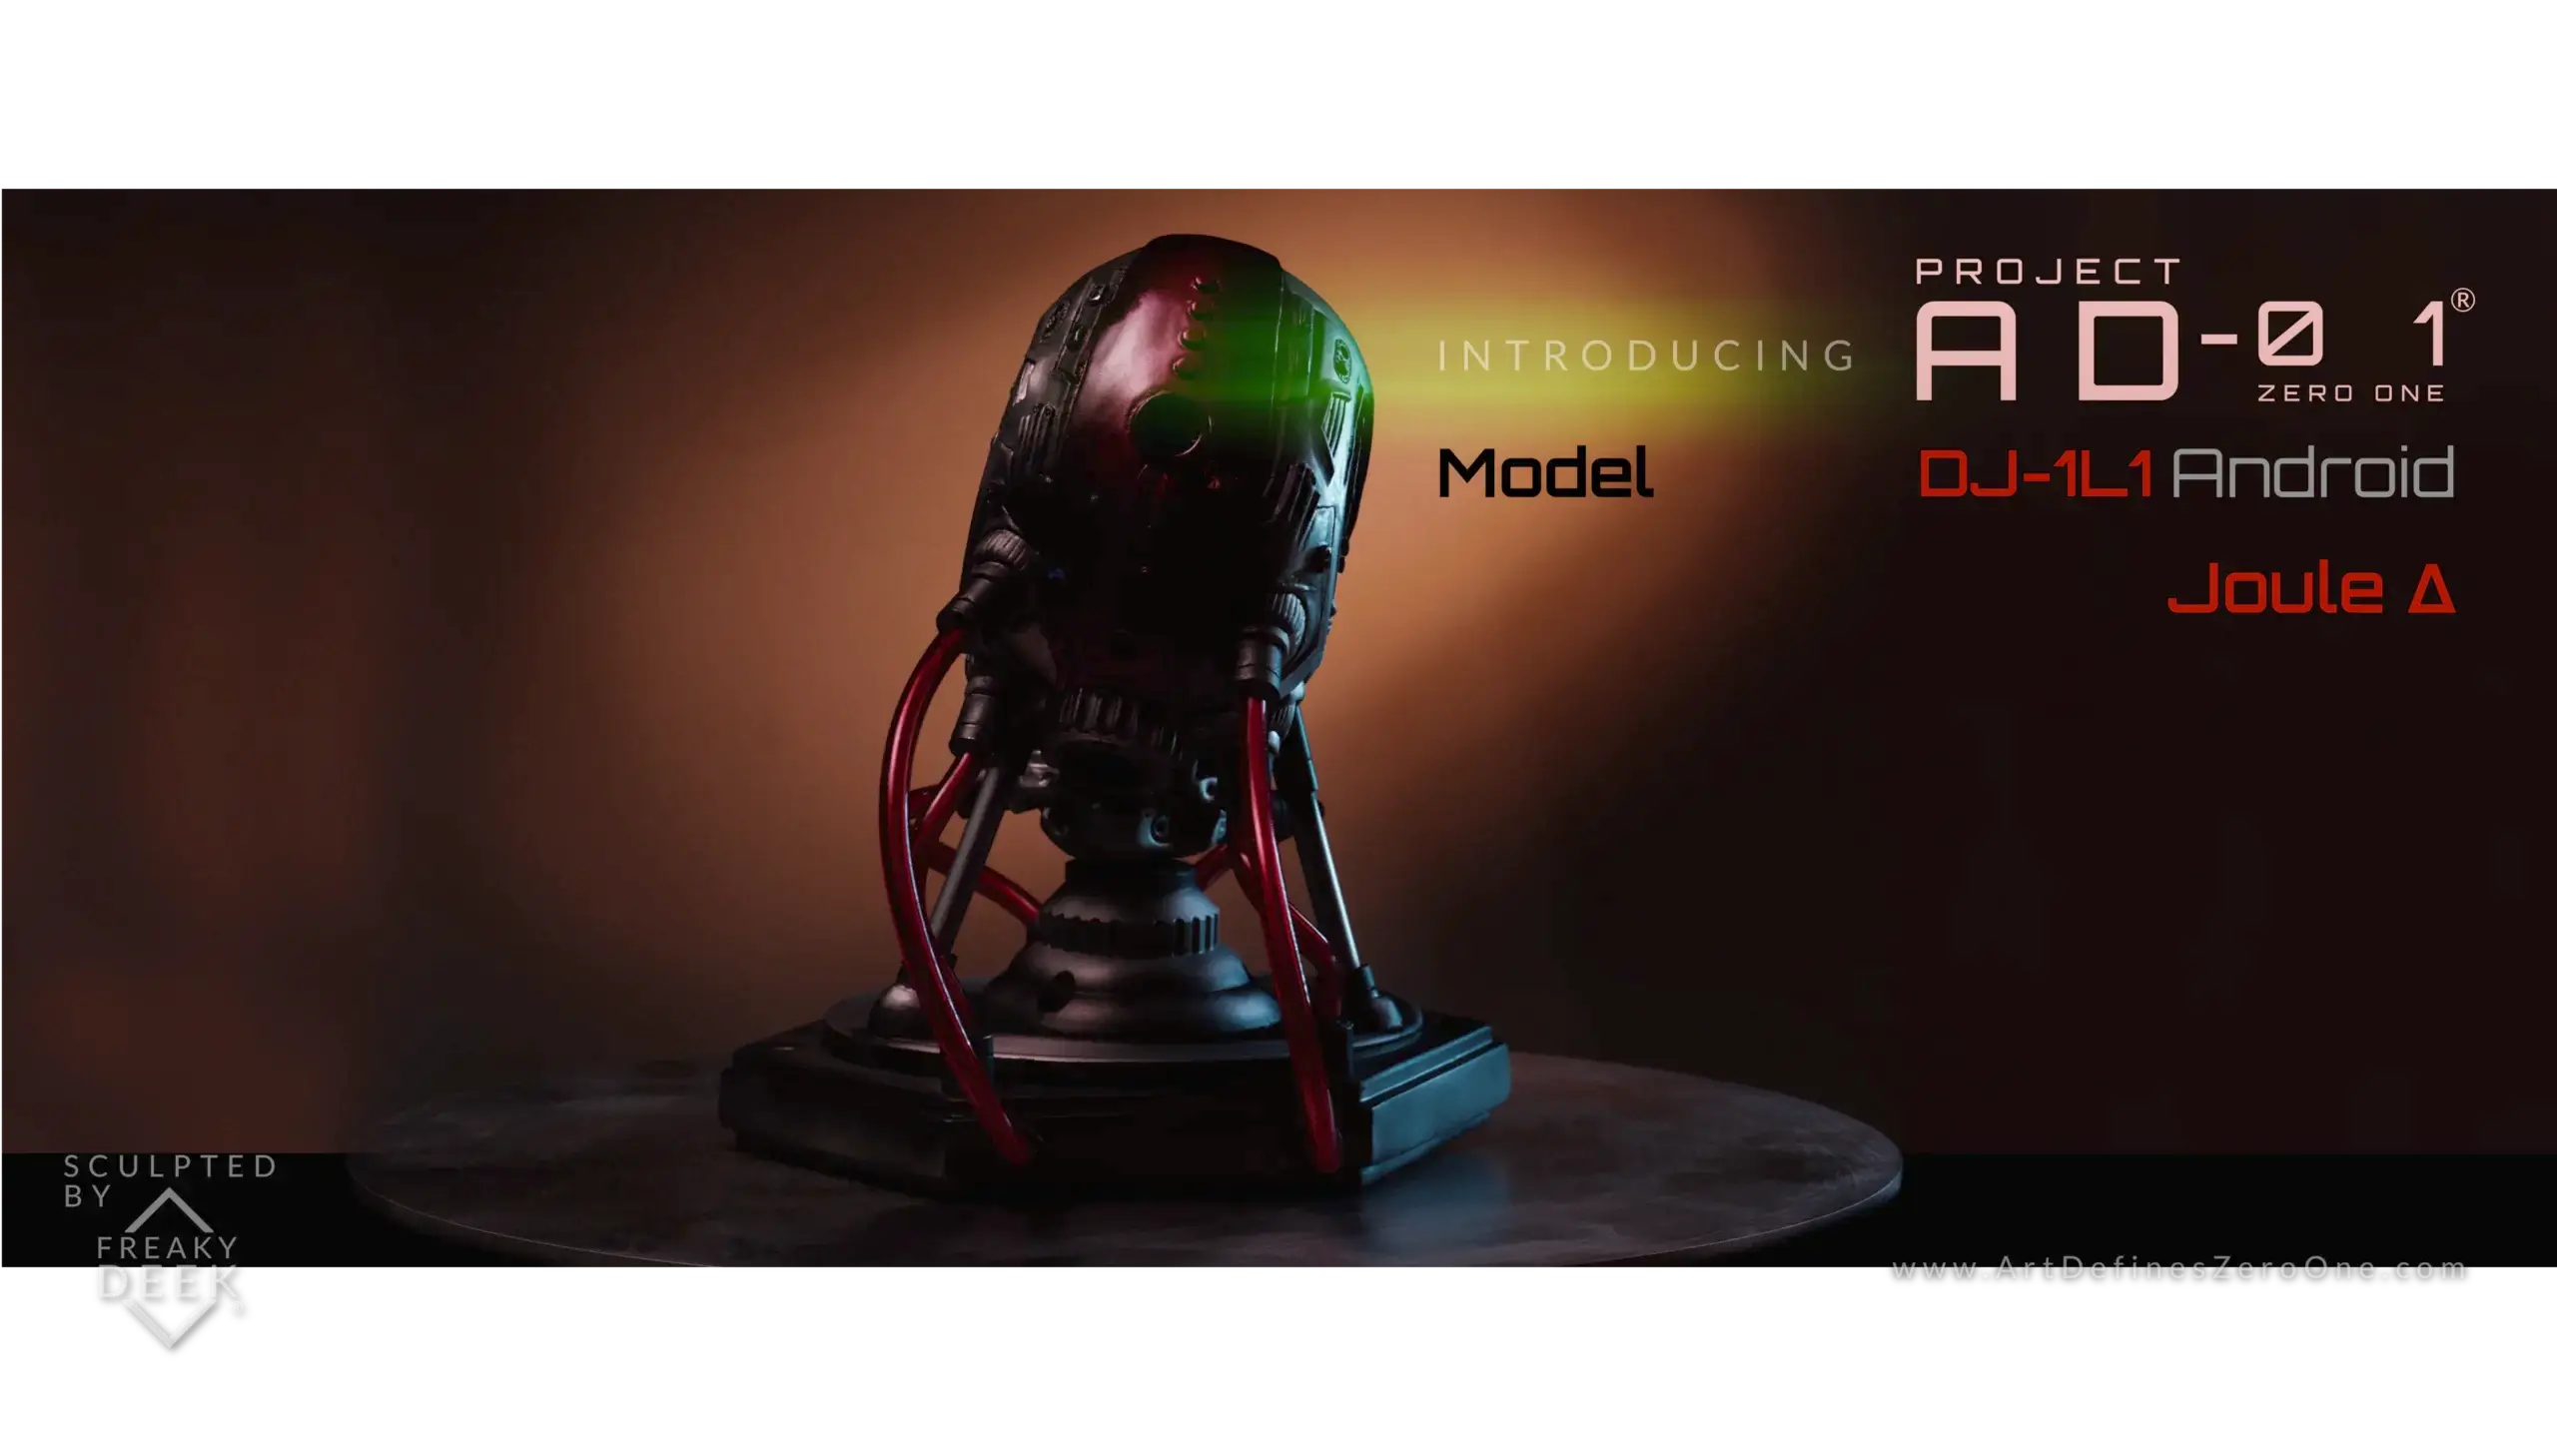 Project AD-01 handmade android red sculpture Joule back view